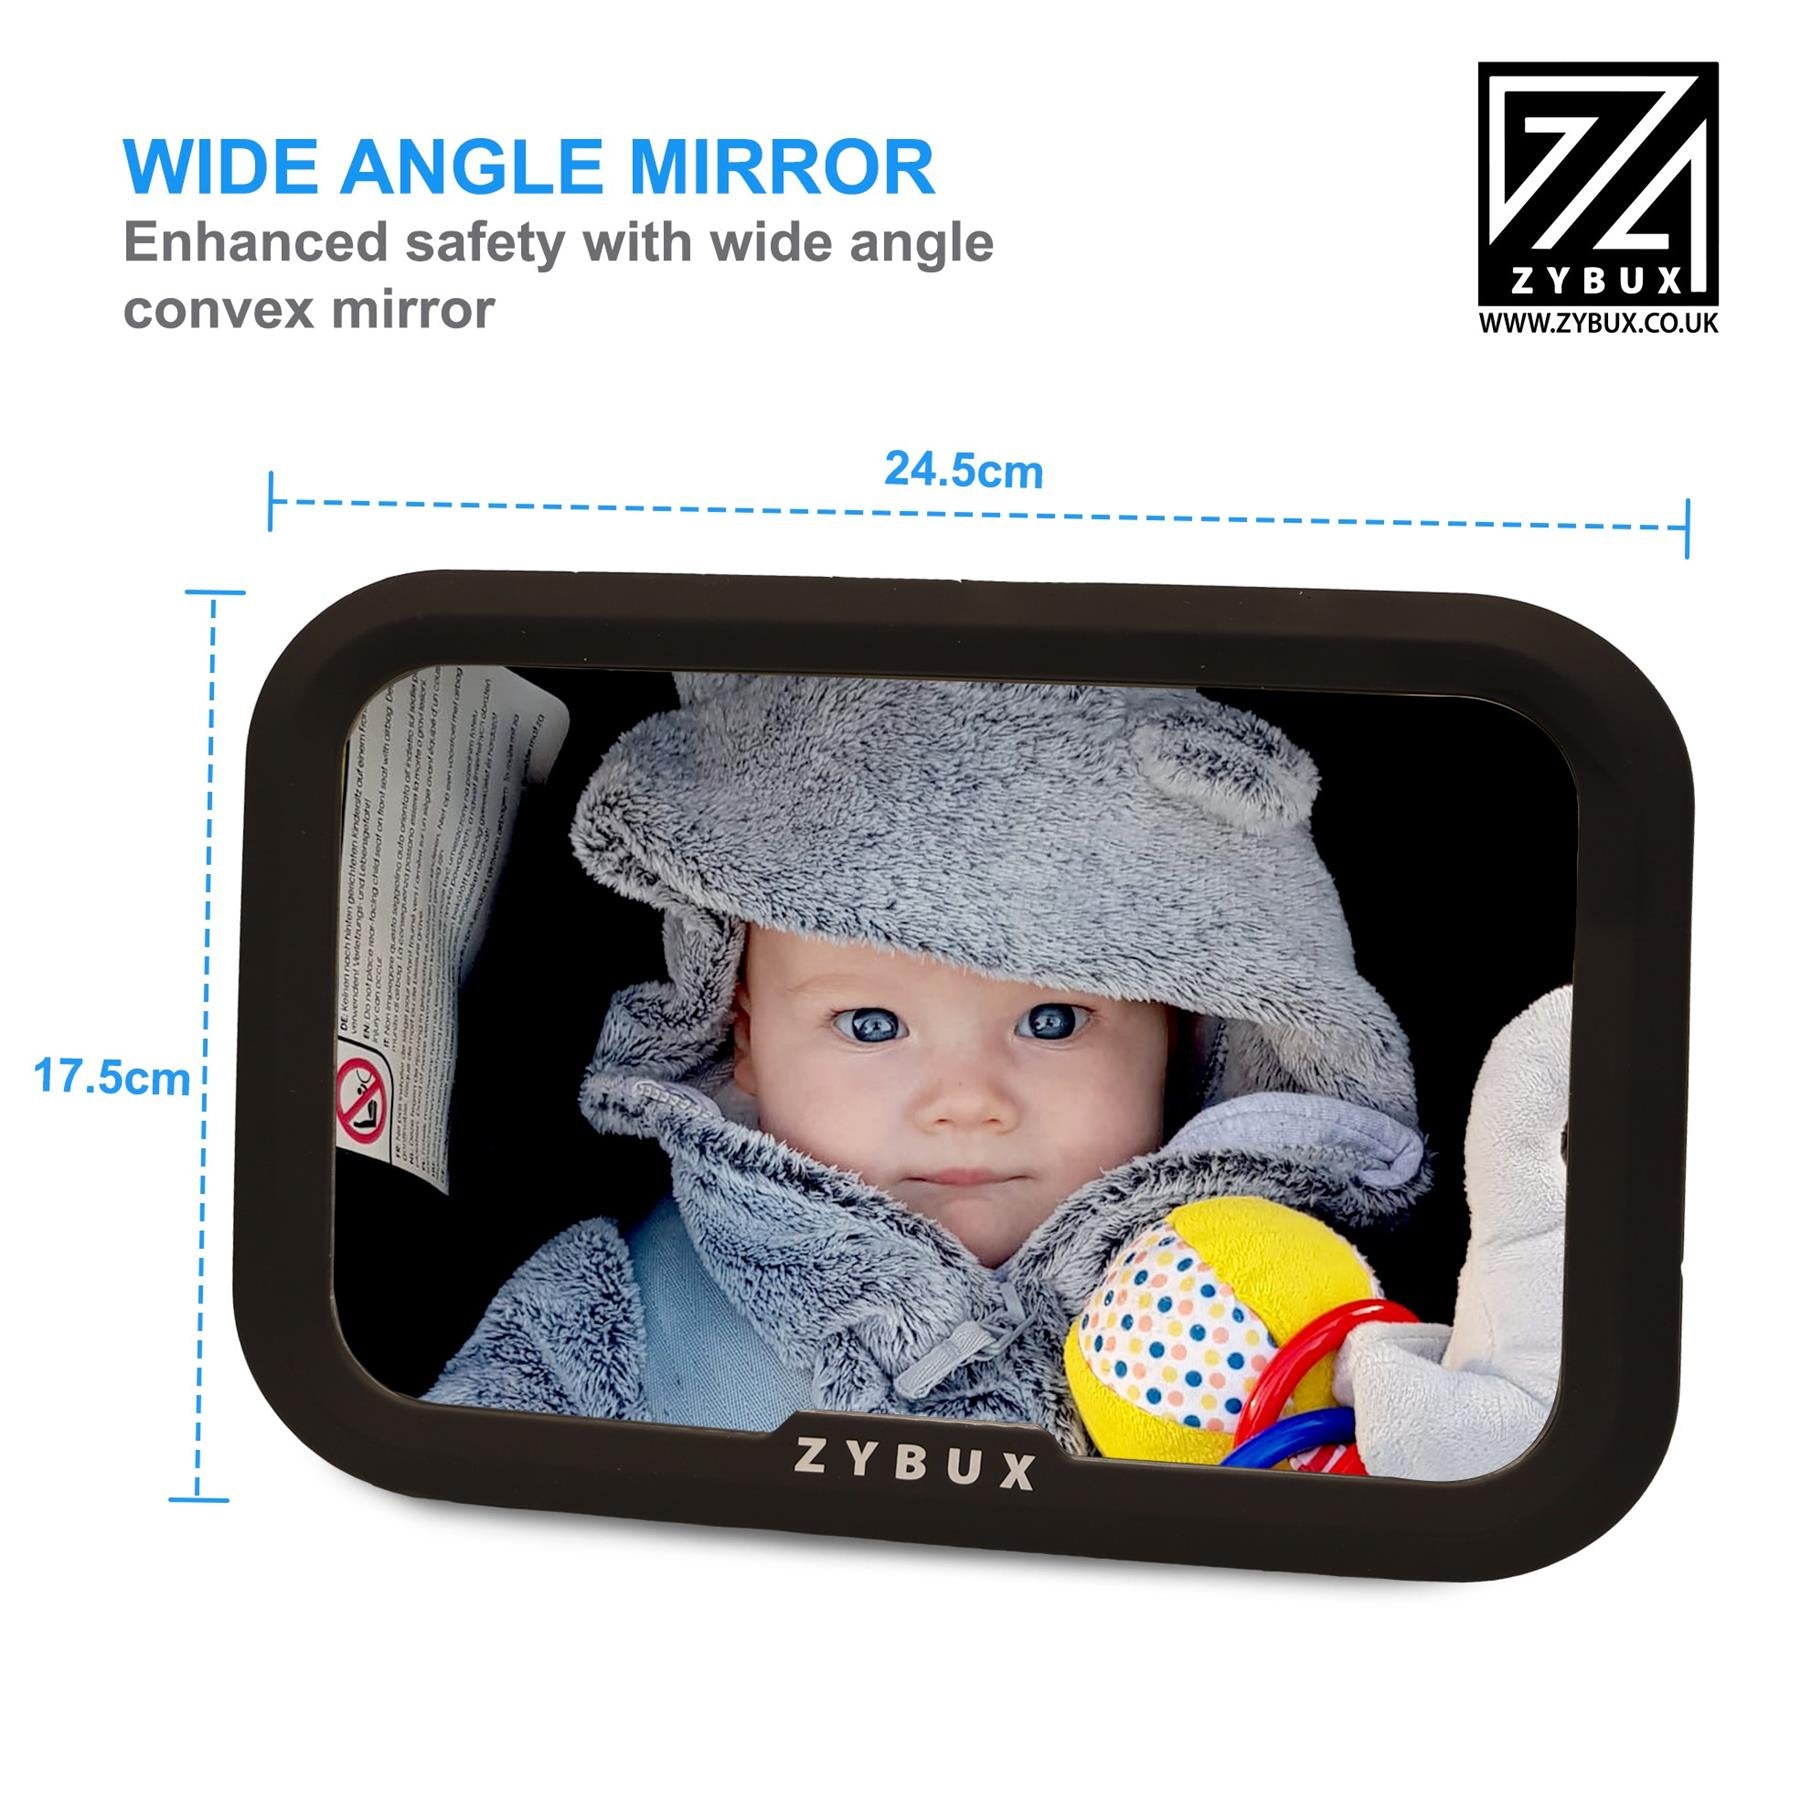 ZYBUX - Back Seat Baby Mirror Peace of Mind to Keep an Eye on Baby in a Rear Facing Child seat - Premium Black Frame - Safest Shatterproof[UPGRADED] - ZYBUX